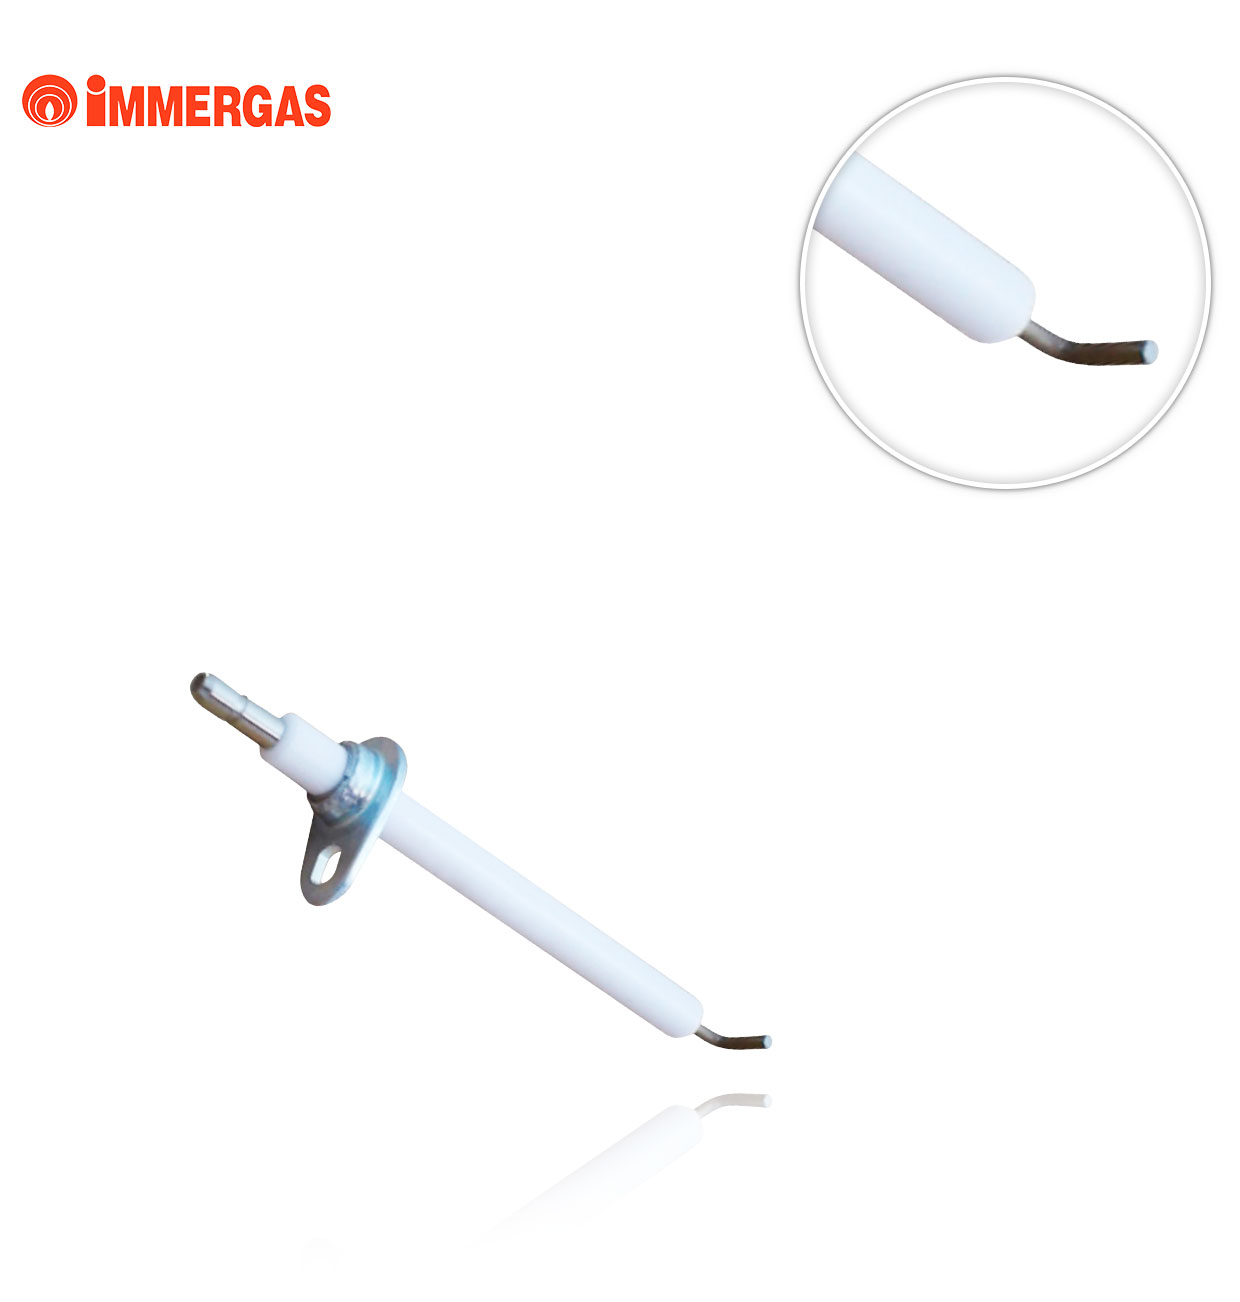 1025665 IMMERGAS SX ELECTRODE